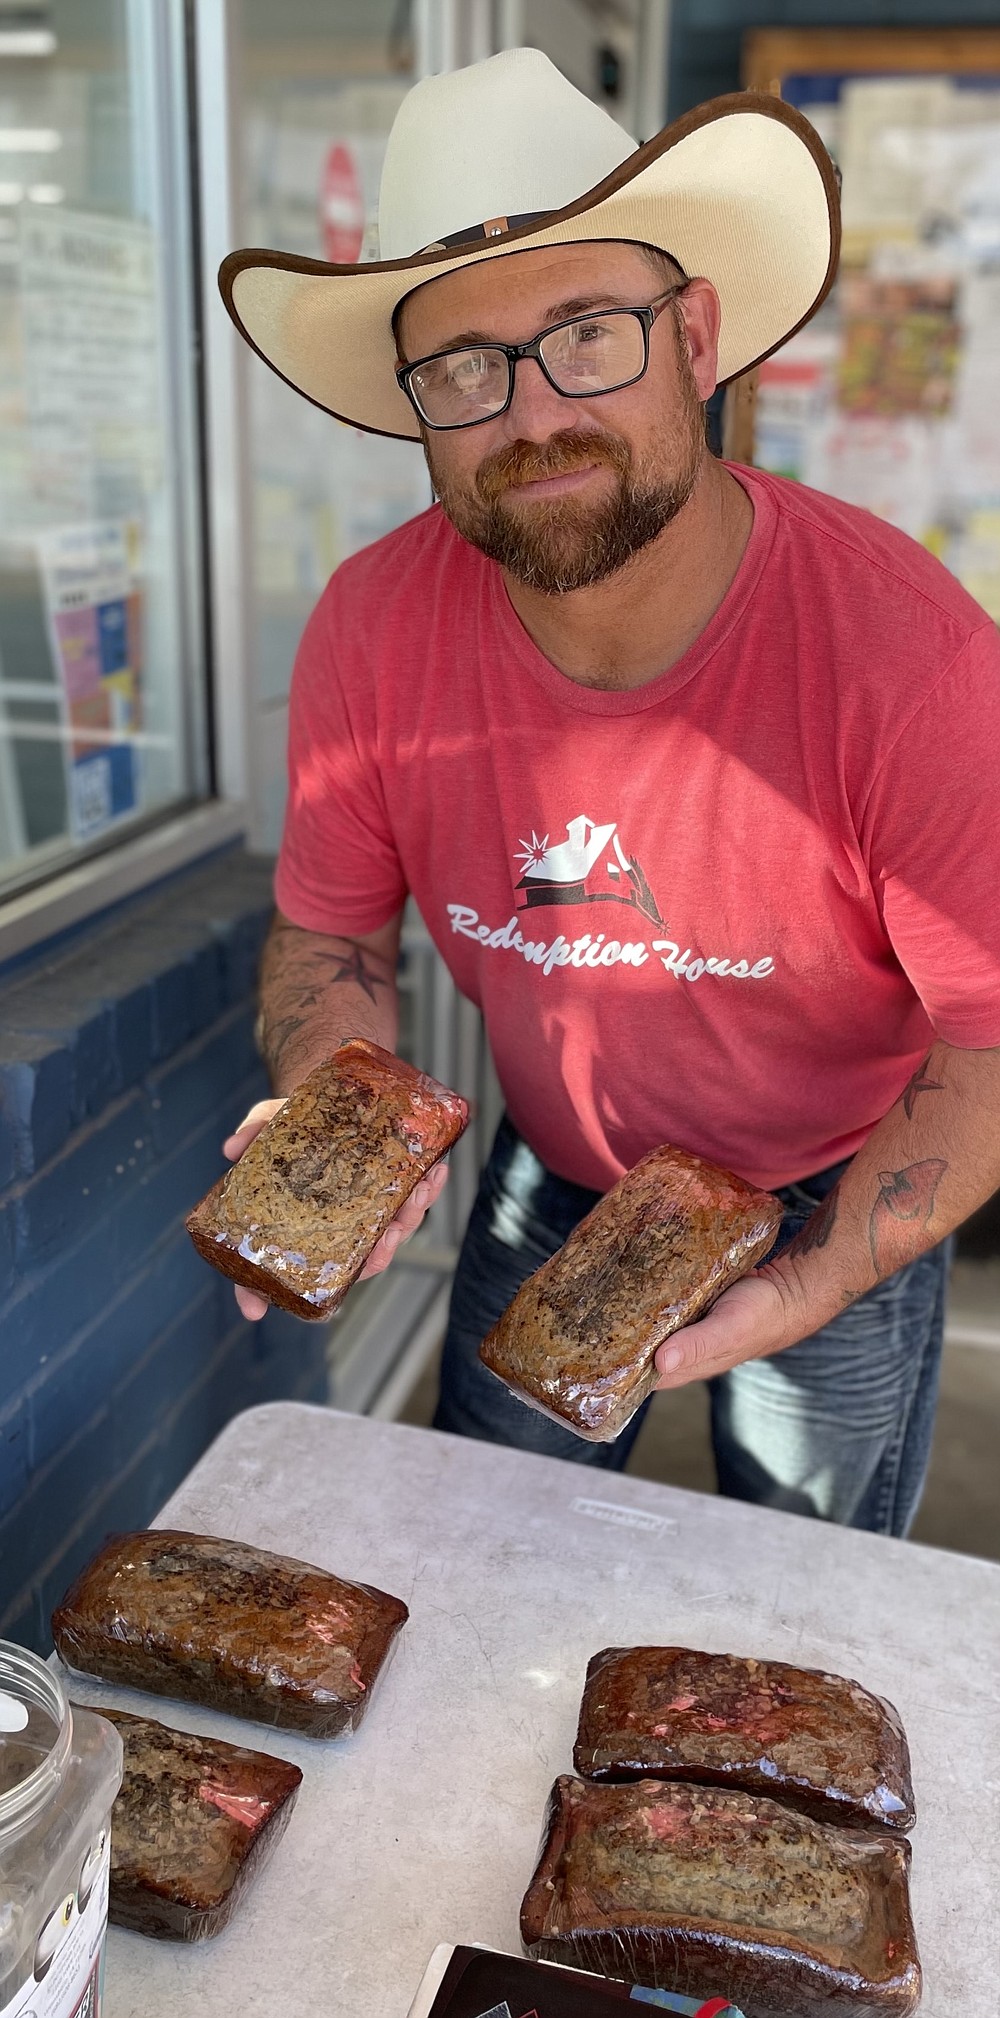 Justin Shane Cook of West Monroe, Louisiana, is selling banana nut bread while supporting Redemption House with Cindy Bishop Ministries in Winnsboro, Louisiana. From his table at Crump Food Center in Linden, he is also telling his story of recovering from addiction.